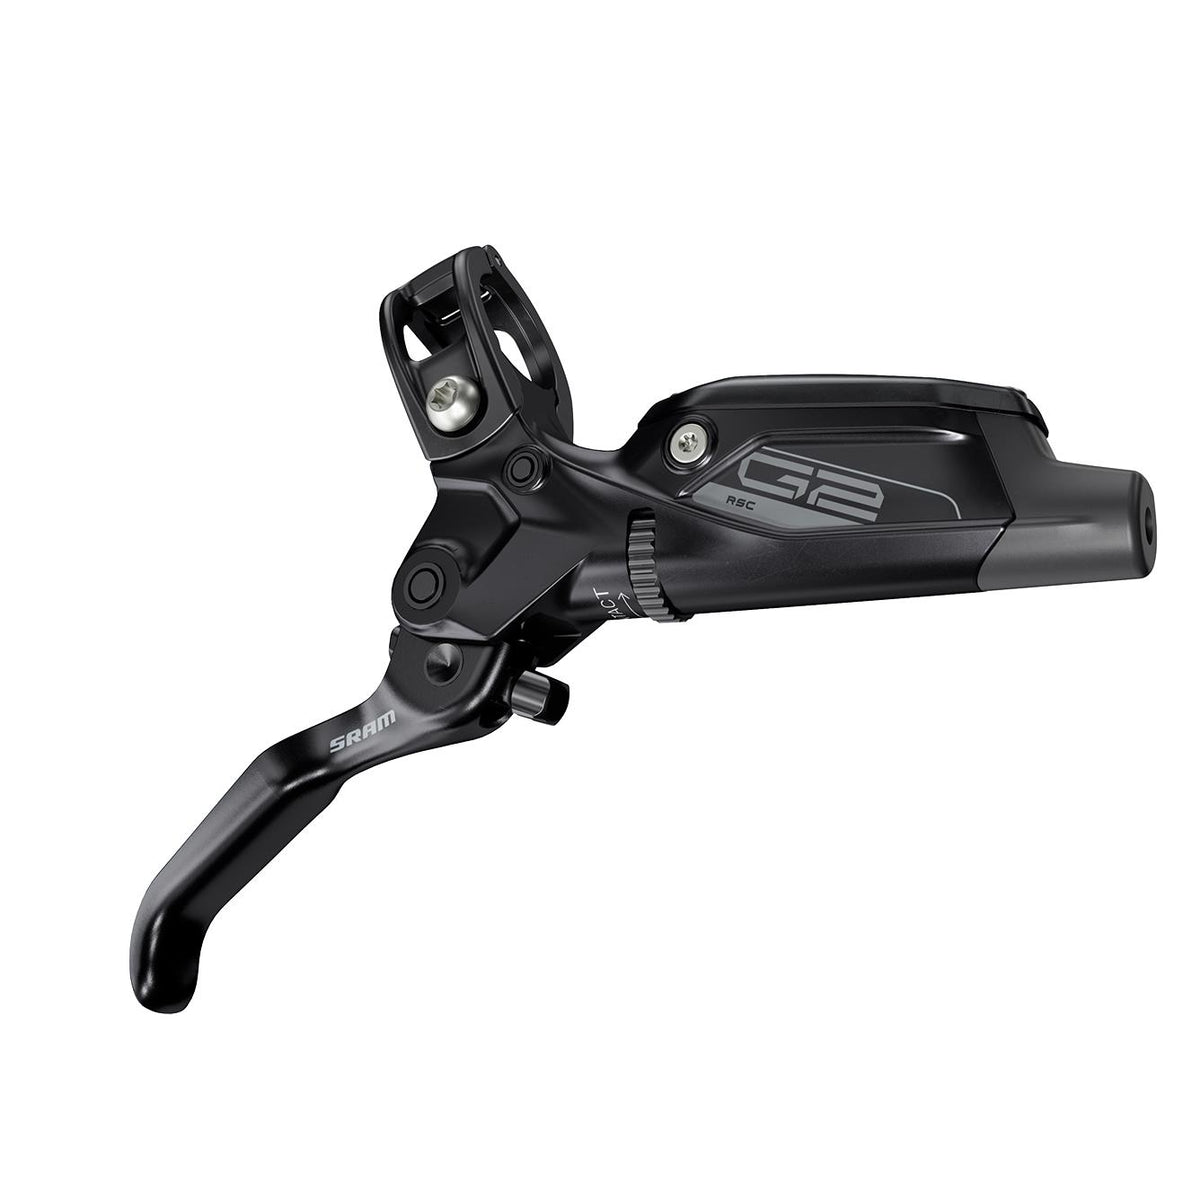 Sram Brake G2 Rsc (Reach, Swinglink, Contact) Aluminum Lever (Includes Mmx Clamp, Rotor/Bracket Sold Separately) A2